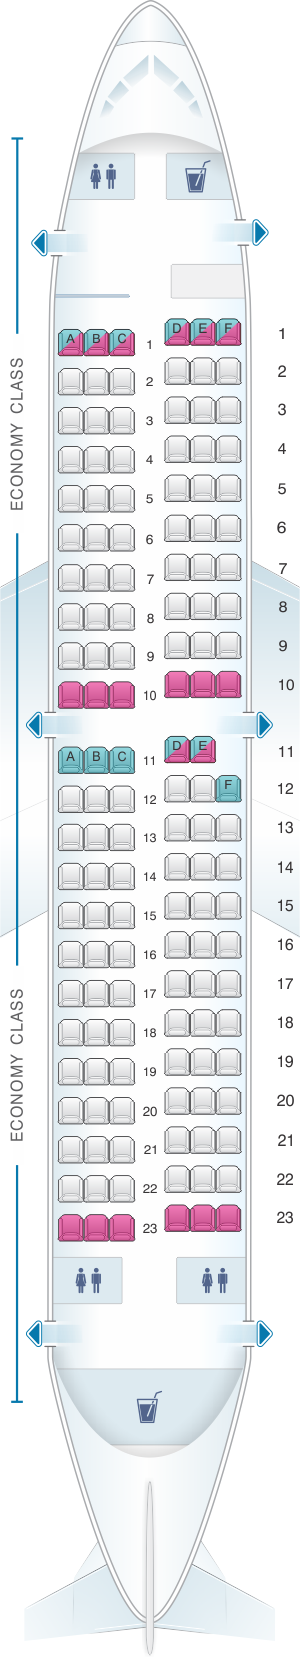 seat assignment on southwest airlines